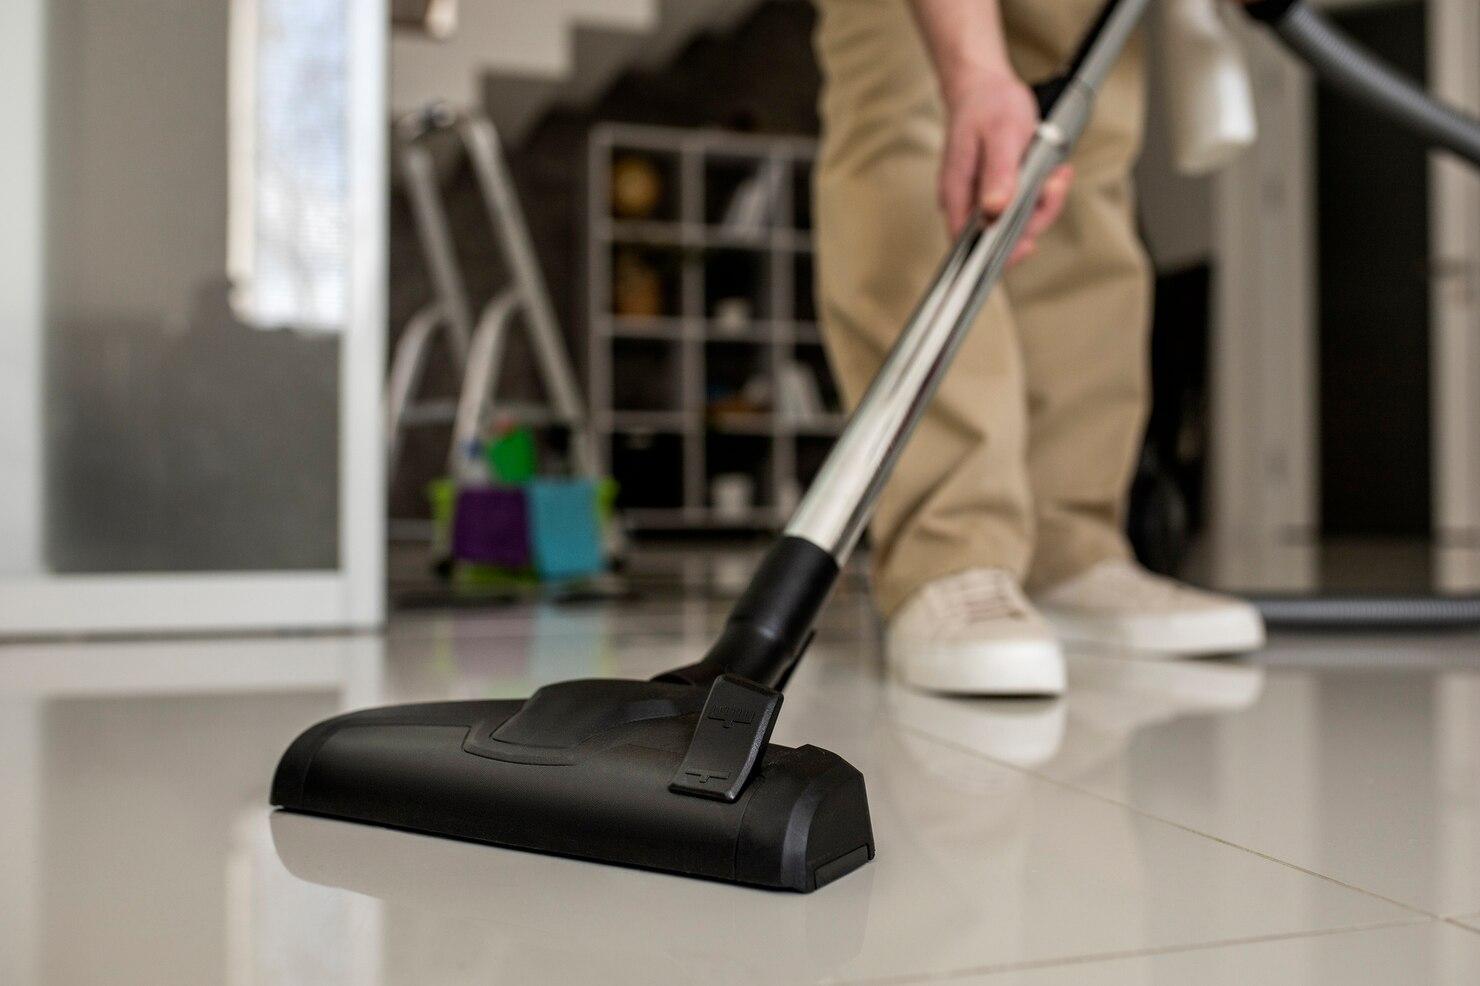 A person vacuuming the floor

Description automatically generated